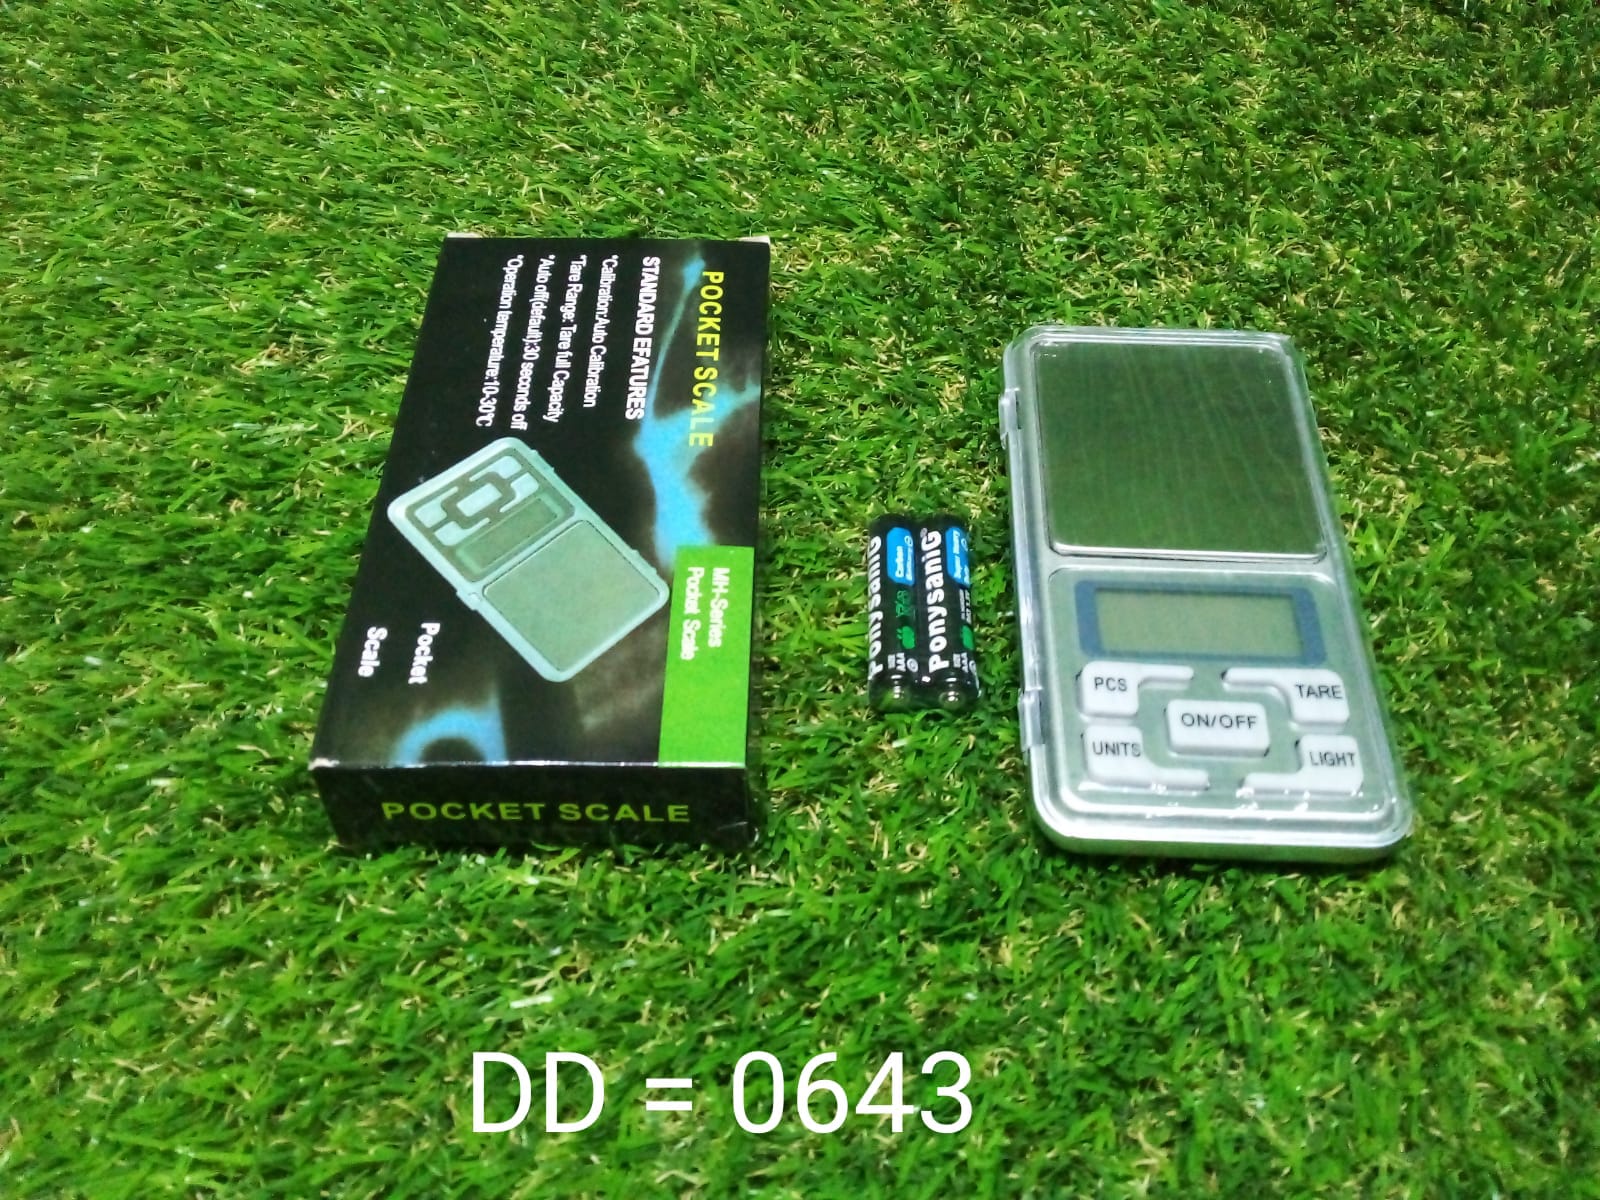 0643 Multipurpose (MH-200) LCD Screen Digital Electronic Portable Mini Pocket Scale(Weighing Scale), 200g